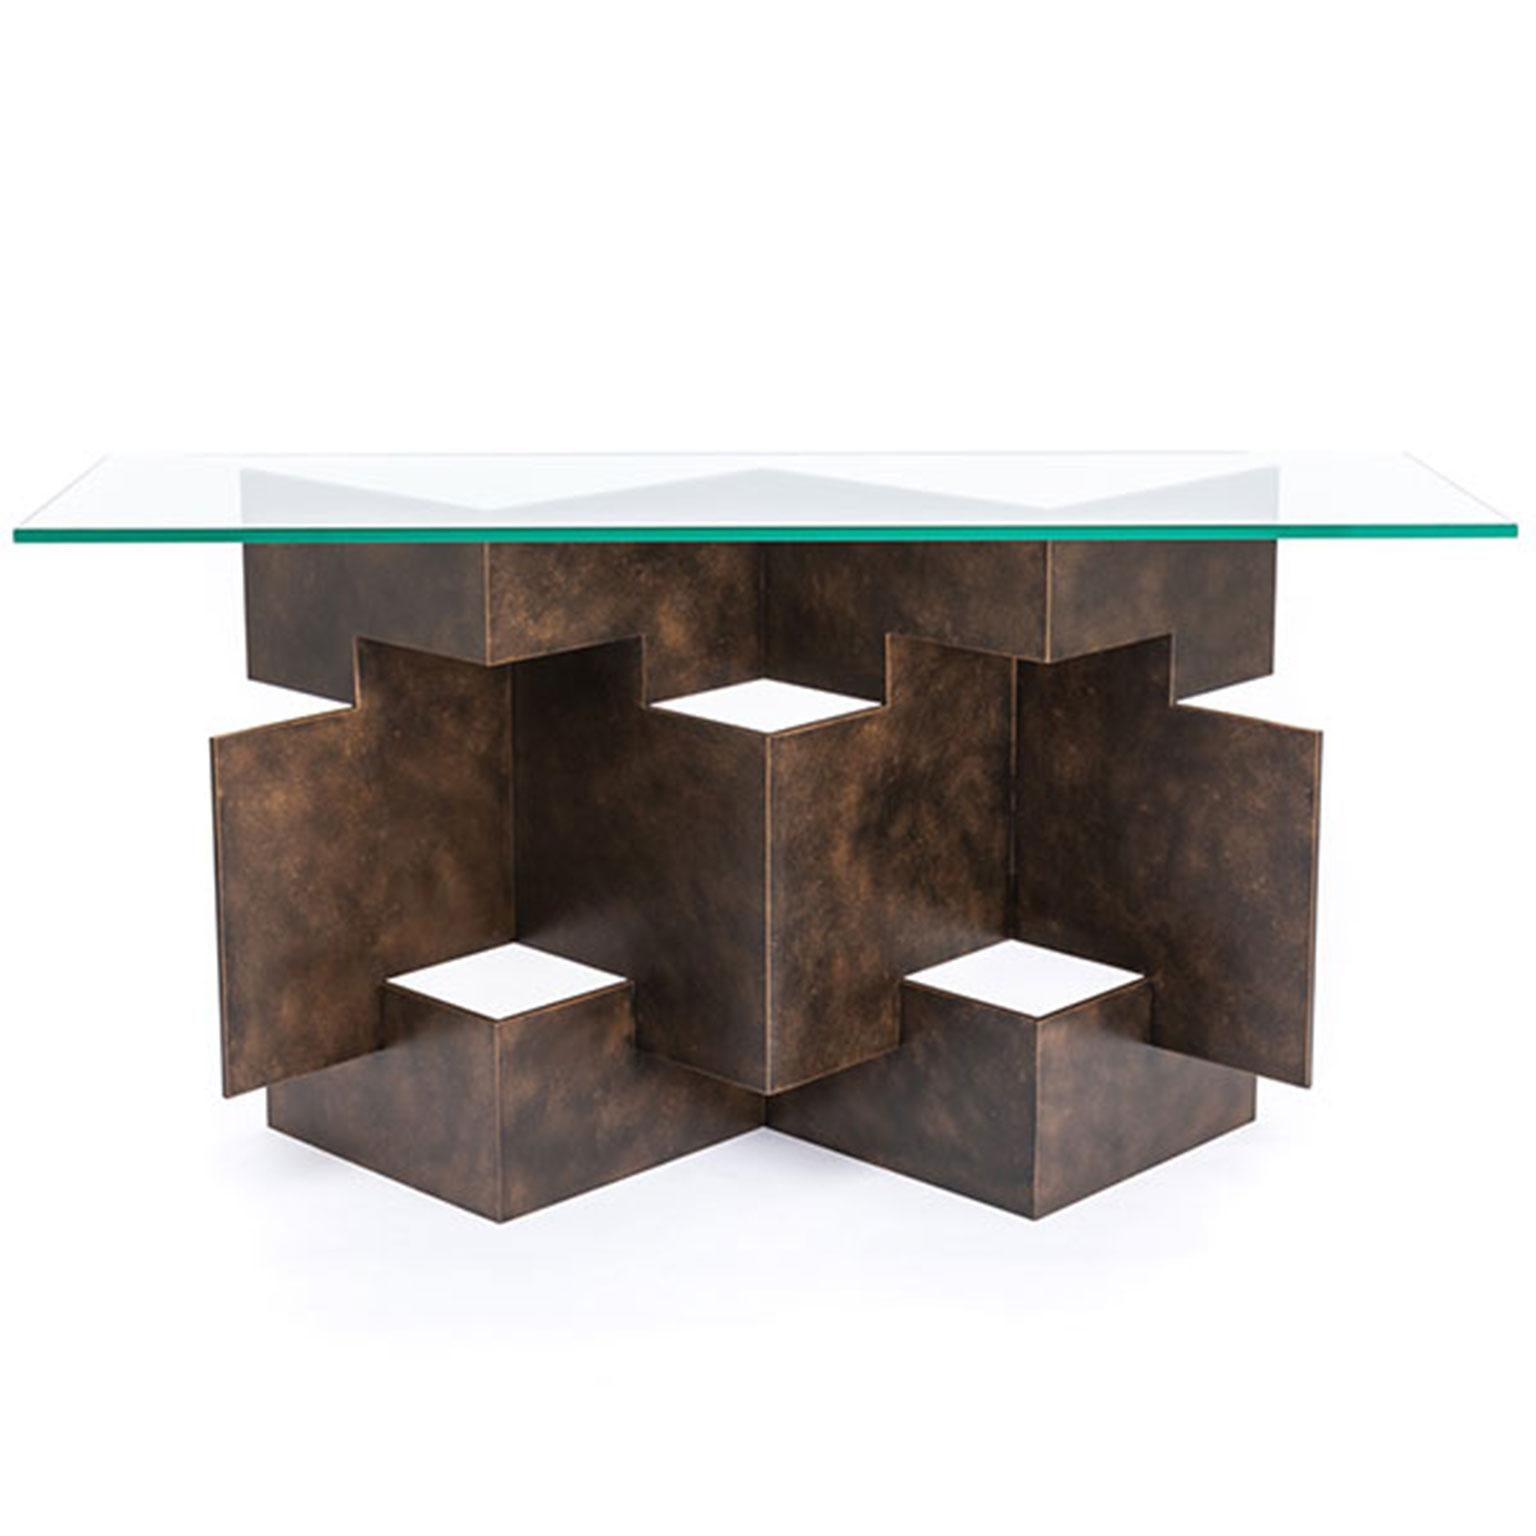 Inspired by the ancient art of folding paper to create a 3D design, this table has been handcrafted using mild steel to create a geometric pattern of squares. Shown here in a hand-applied bronze finish with 15mm thick glass top.

Designed and